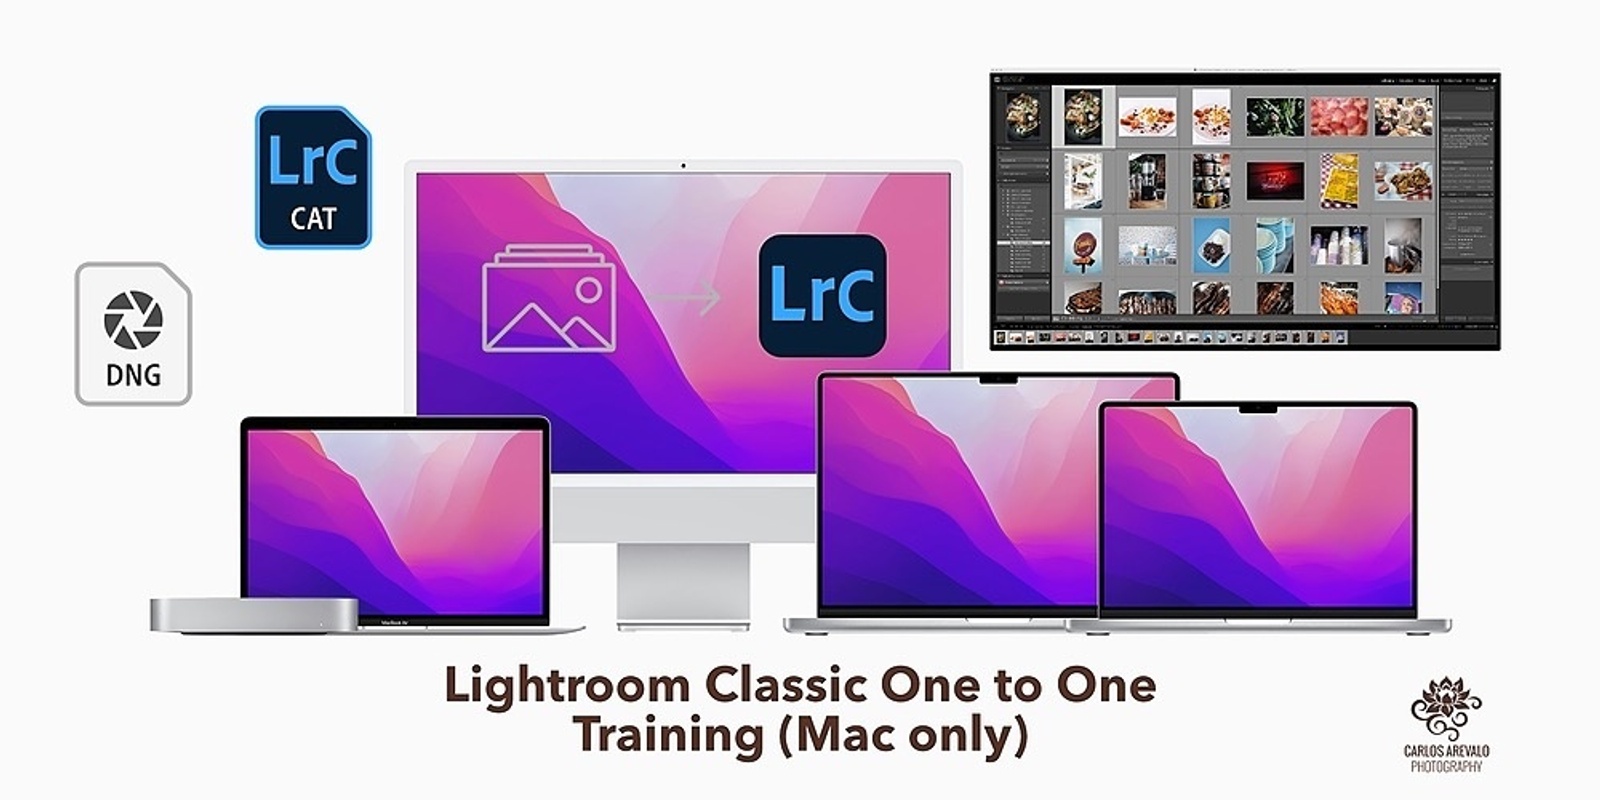 👨🏽‍💻 Lightroom Classic One to One Training (Mac only)